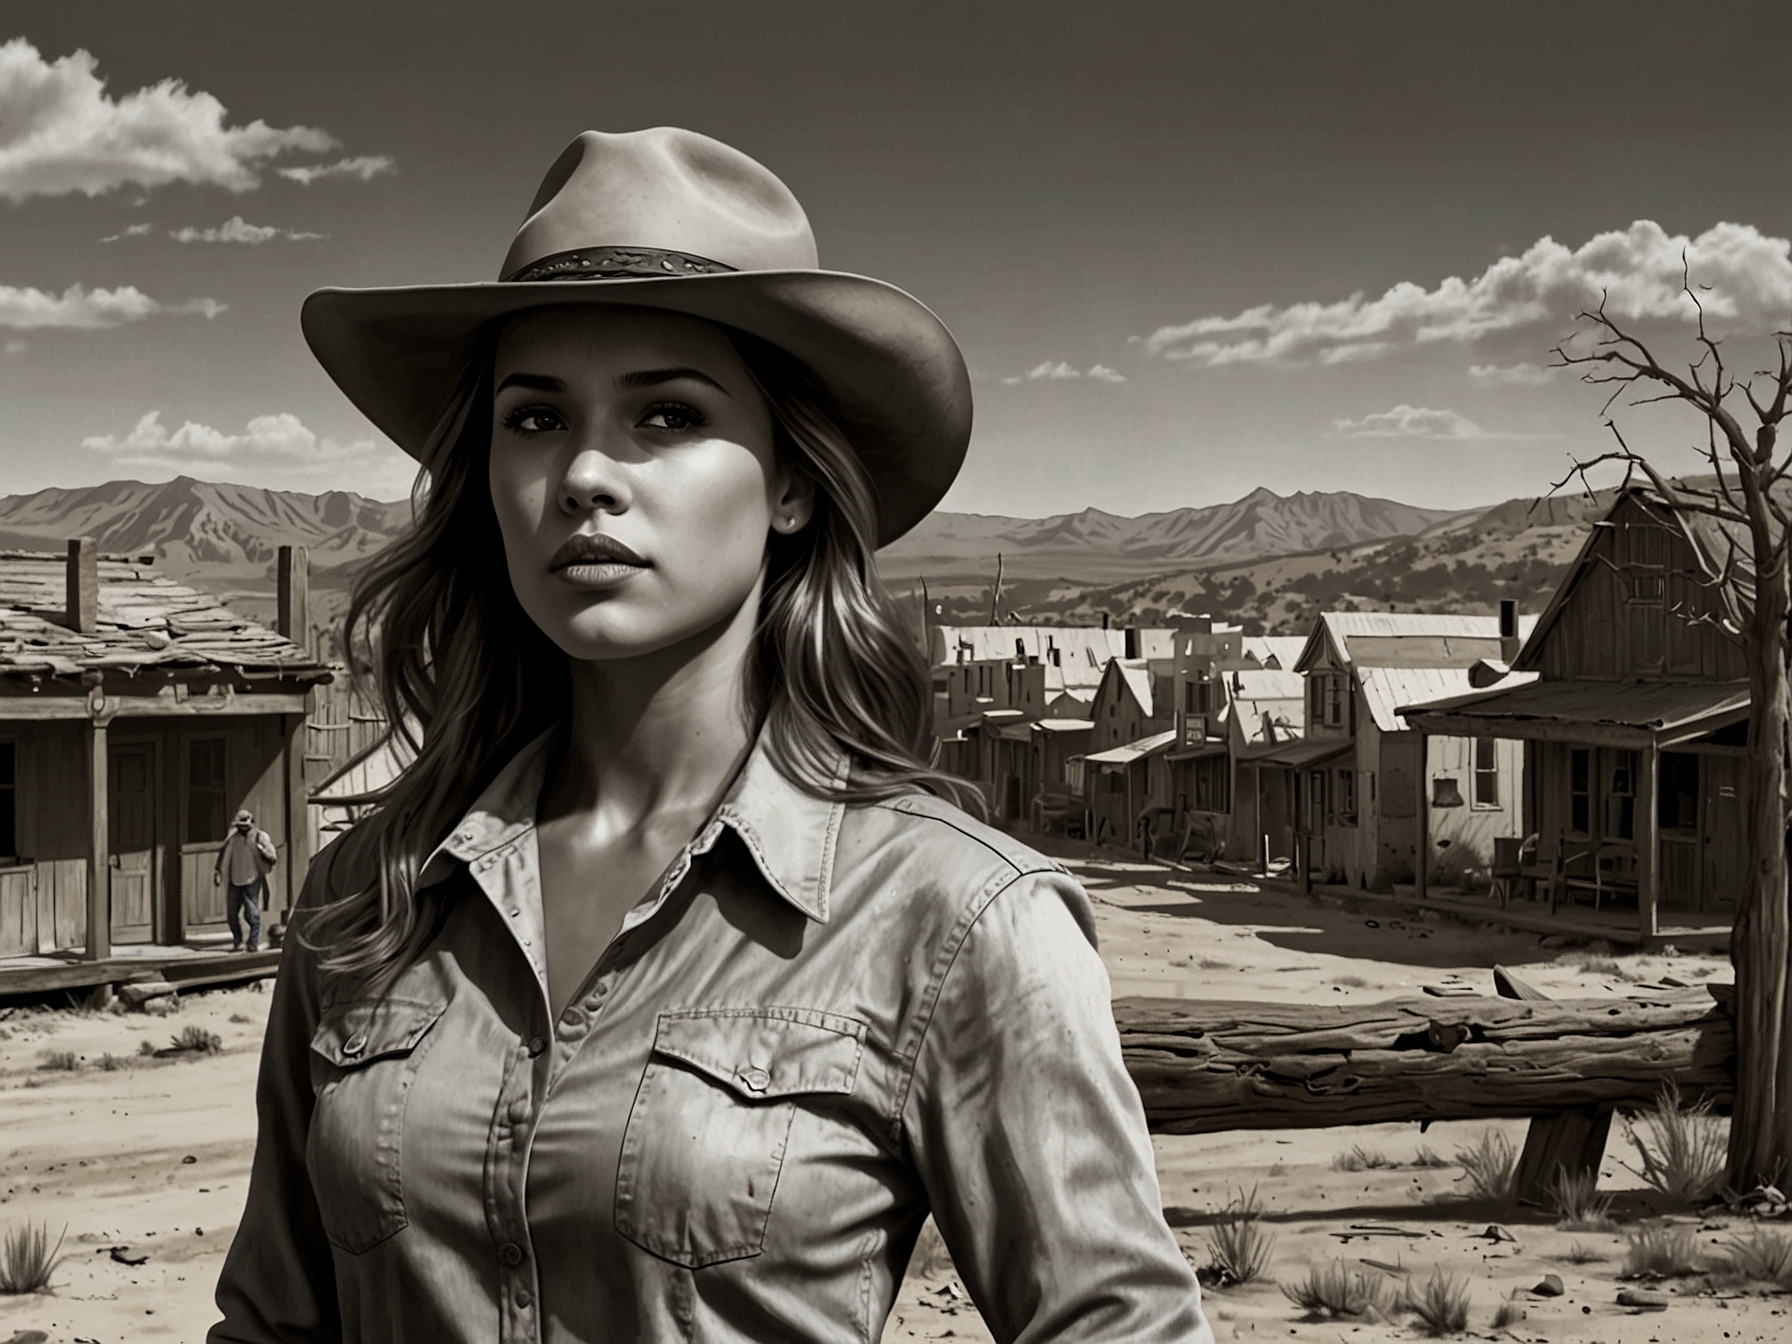 A thrilling scene from Trigger Warning, featuring Jessica Alba as Parker, set against the rustic and eerie backdrop of Madrid, New Mexico, highlighting the town's old Western charm.